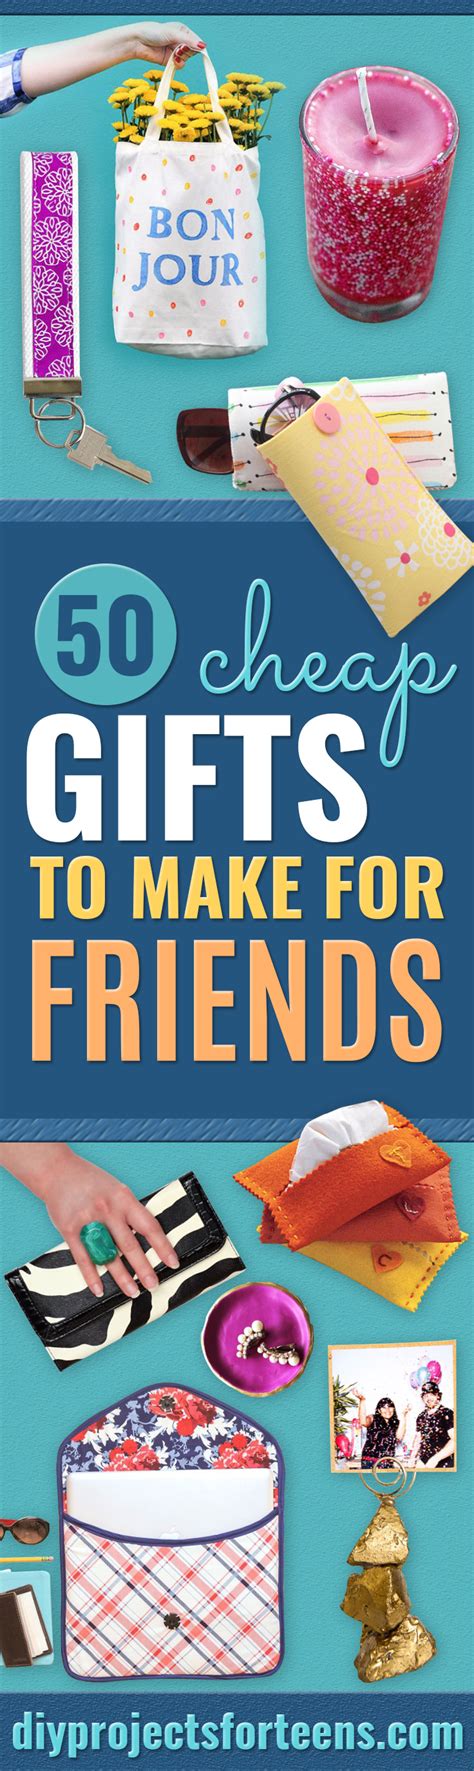 Consider giftbasketsoverseas.com to send gifts for any canadian on your list: 50 Cheap Gifts to Make For Friends - DIY Projects for Teens